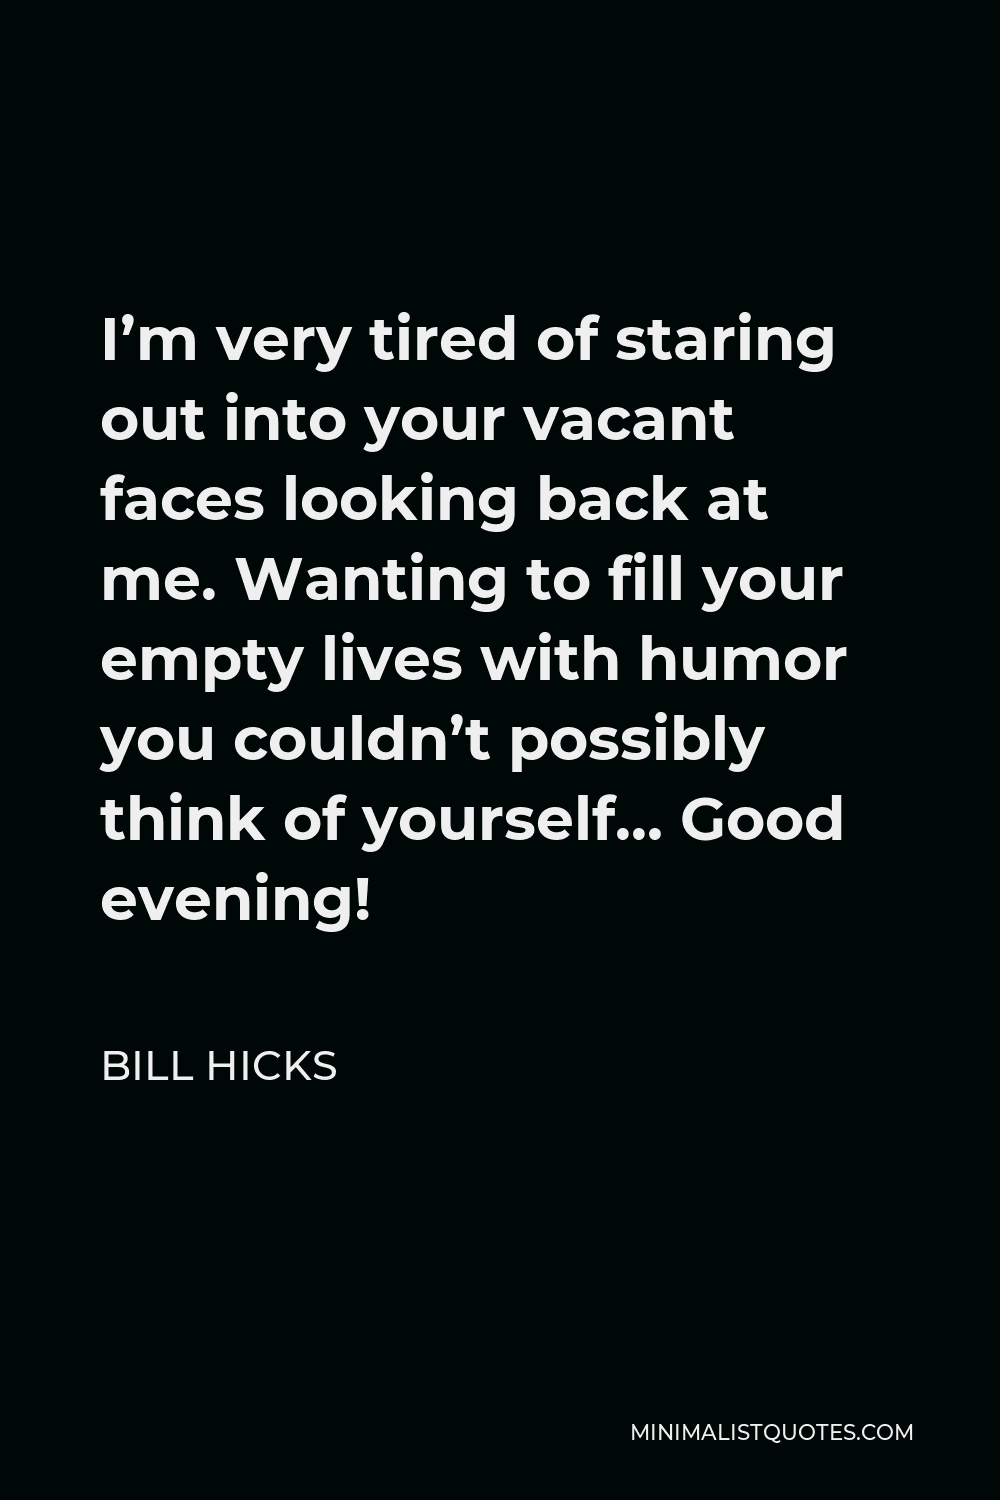 Bill Hicks Quote - I’m very tired of staring out into your vacant faces looking back at me. Wanting to fill your empty lives with humor you couldn’t possibly think of yourself… Good evening!